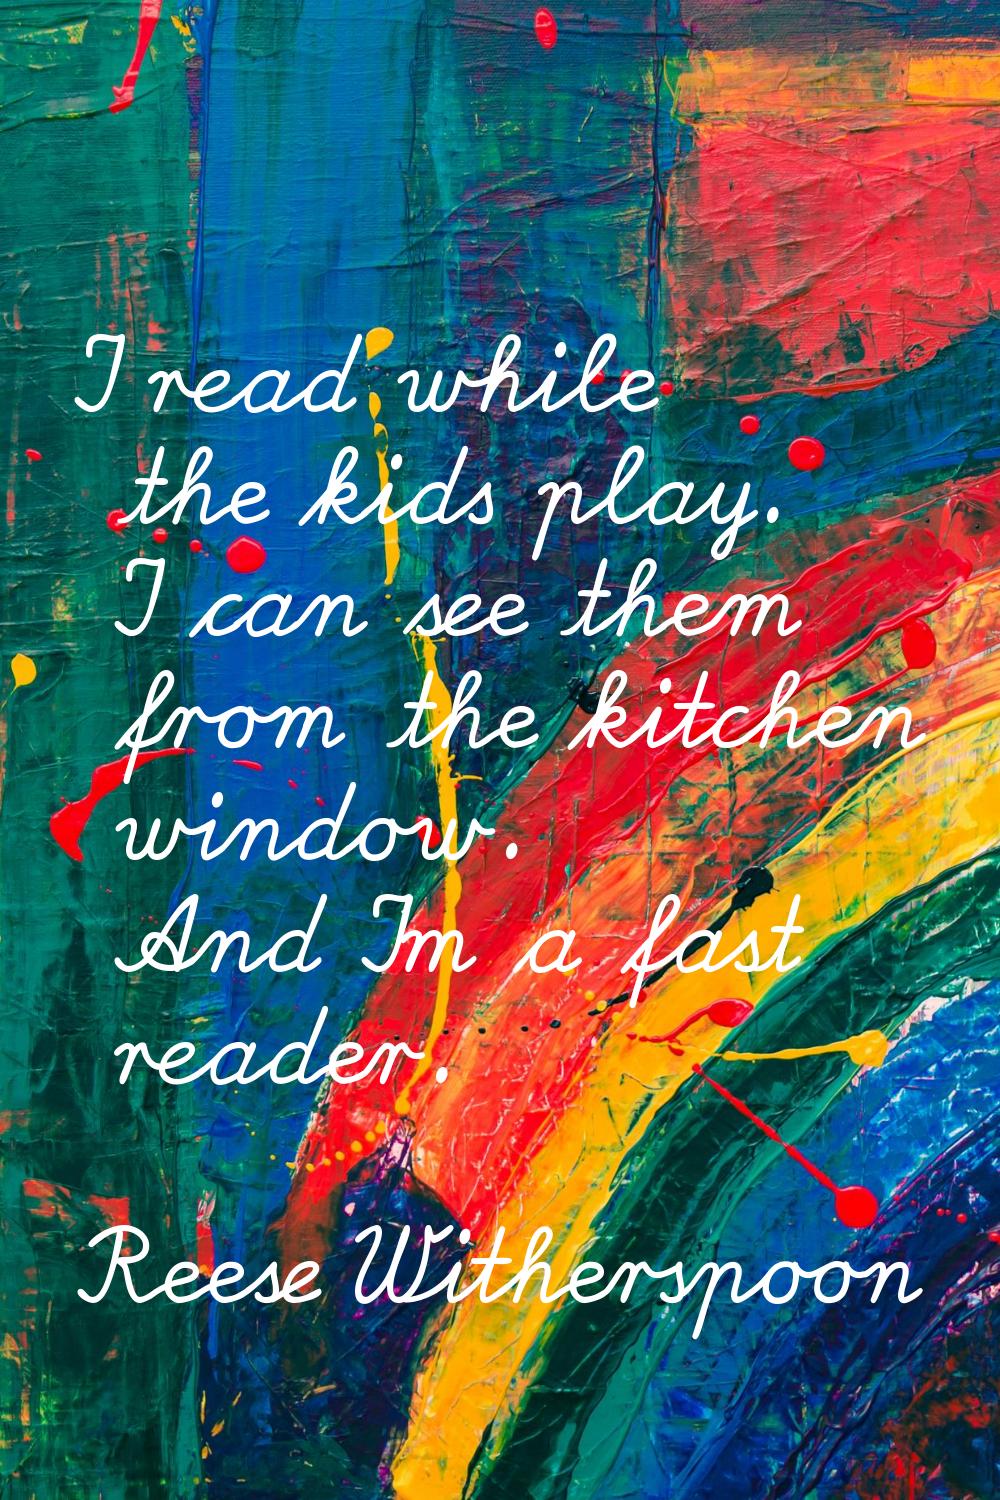 I read while the kids play. I can see them from the kitchen window. And I'm a fast reader.